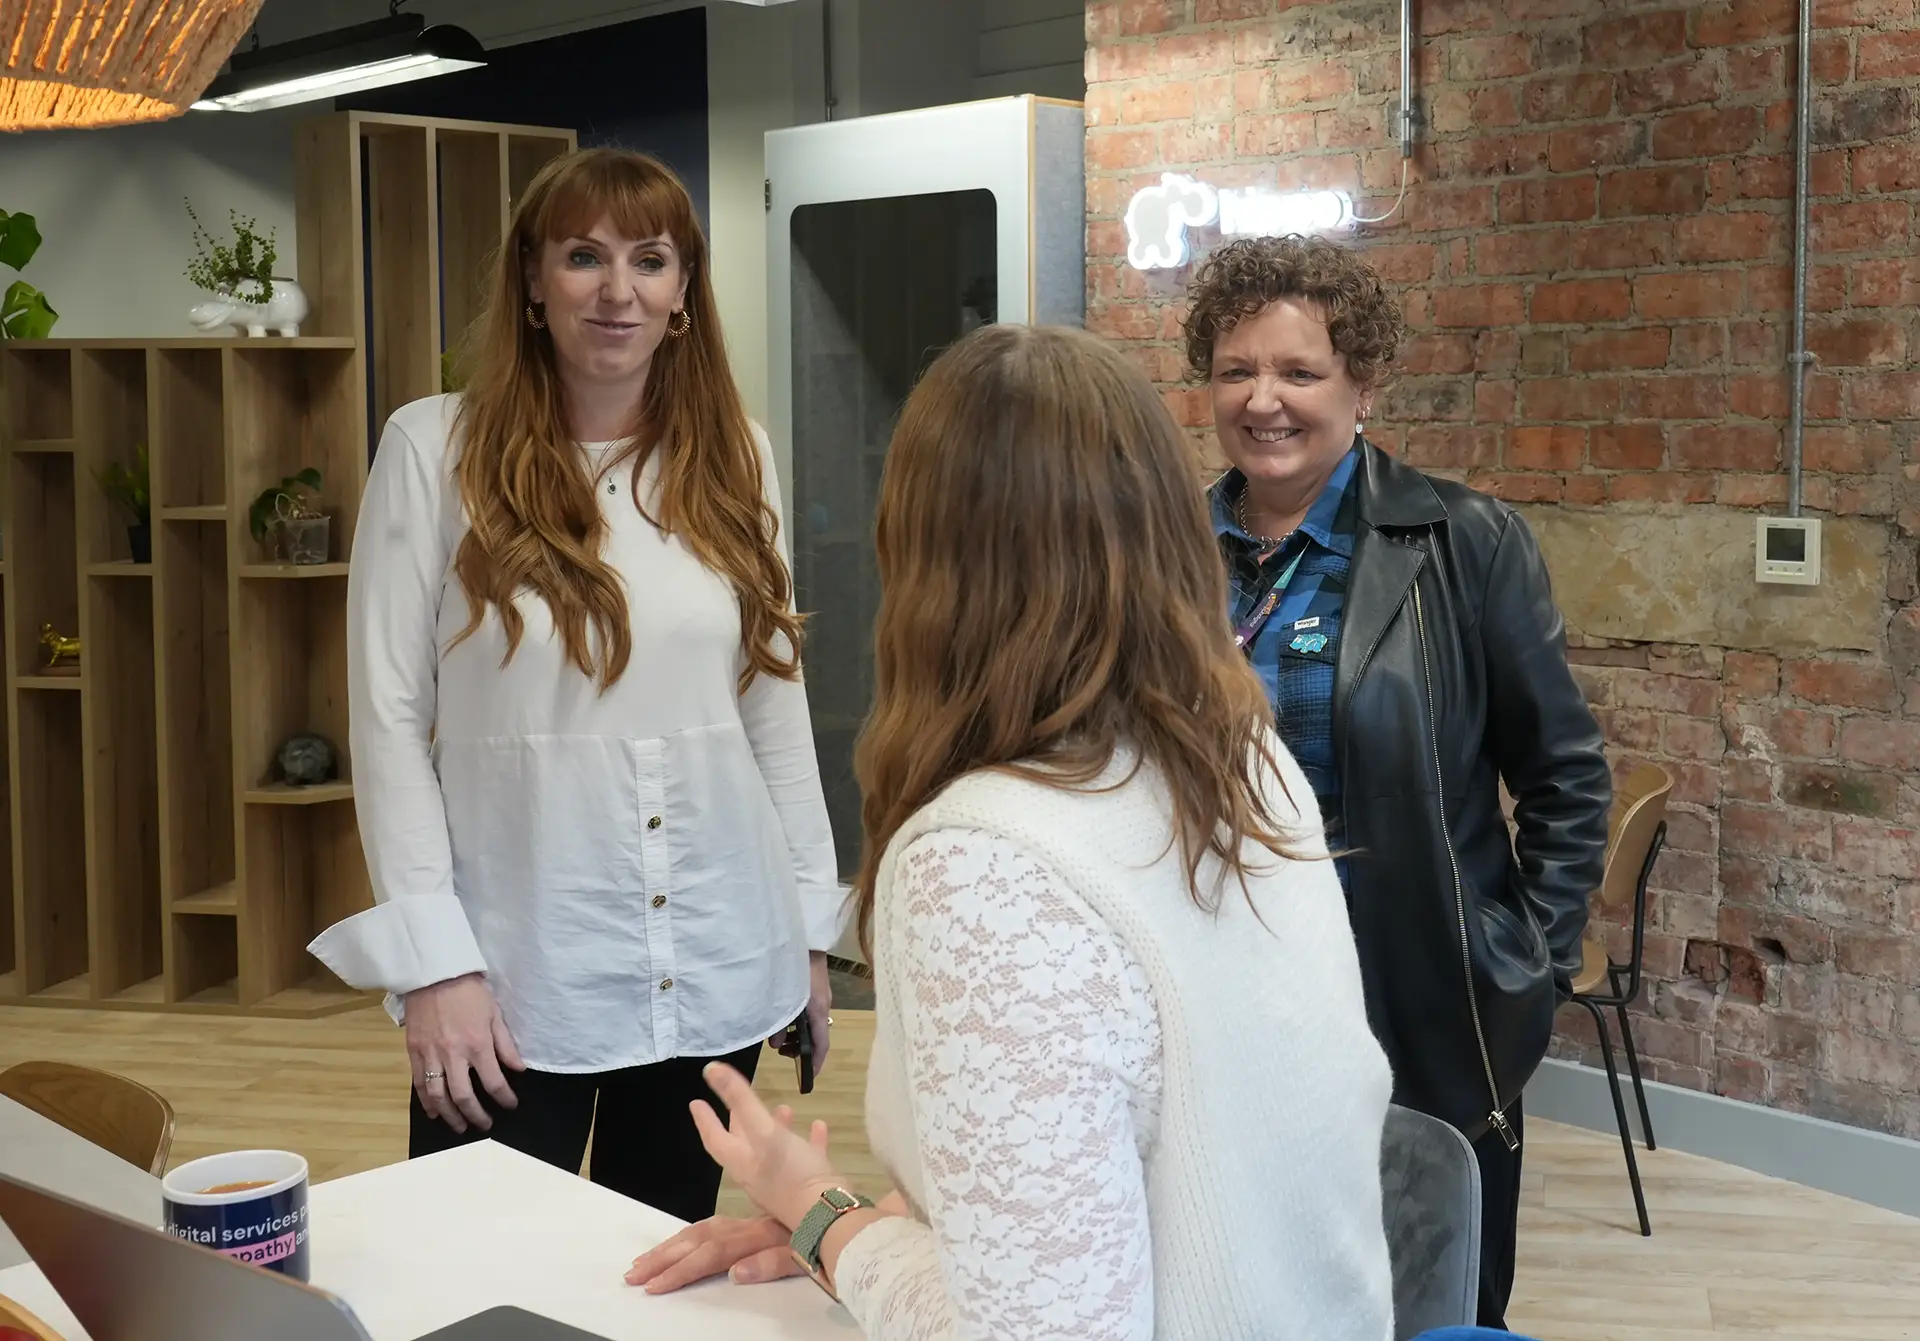 Three women stand in a modern office space, enjoying a conversation. One lady has her back to use while the other two are facing the camera engaged in conversation with the other.